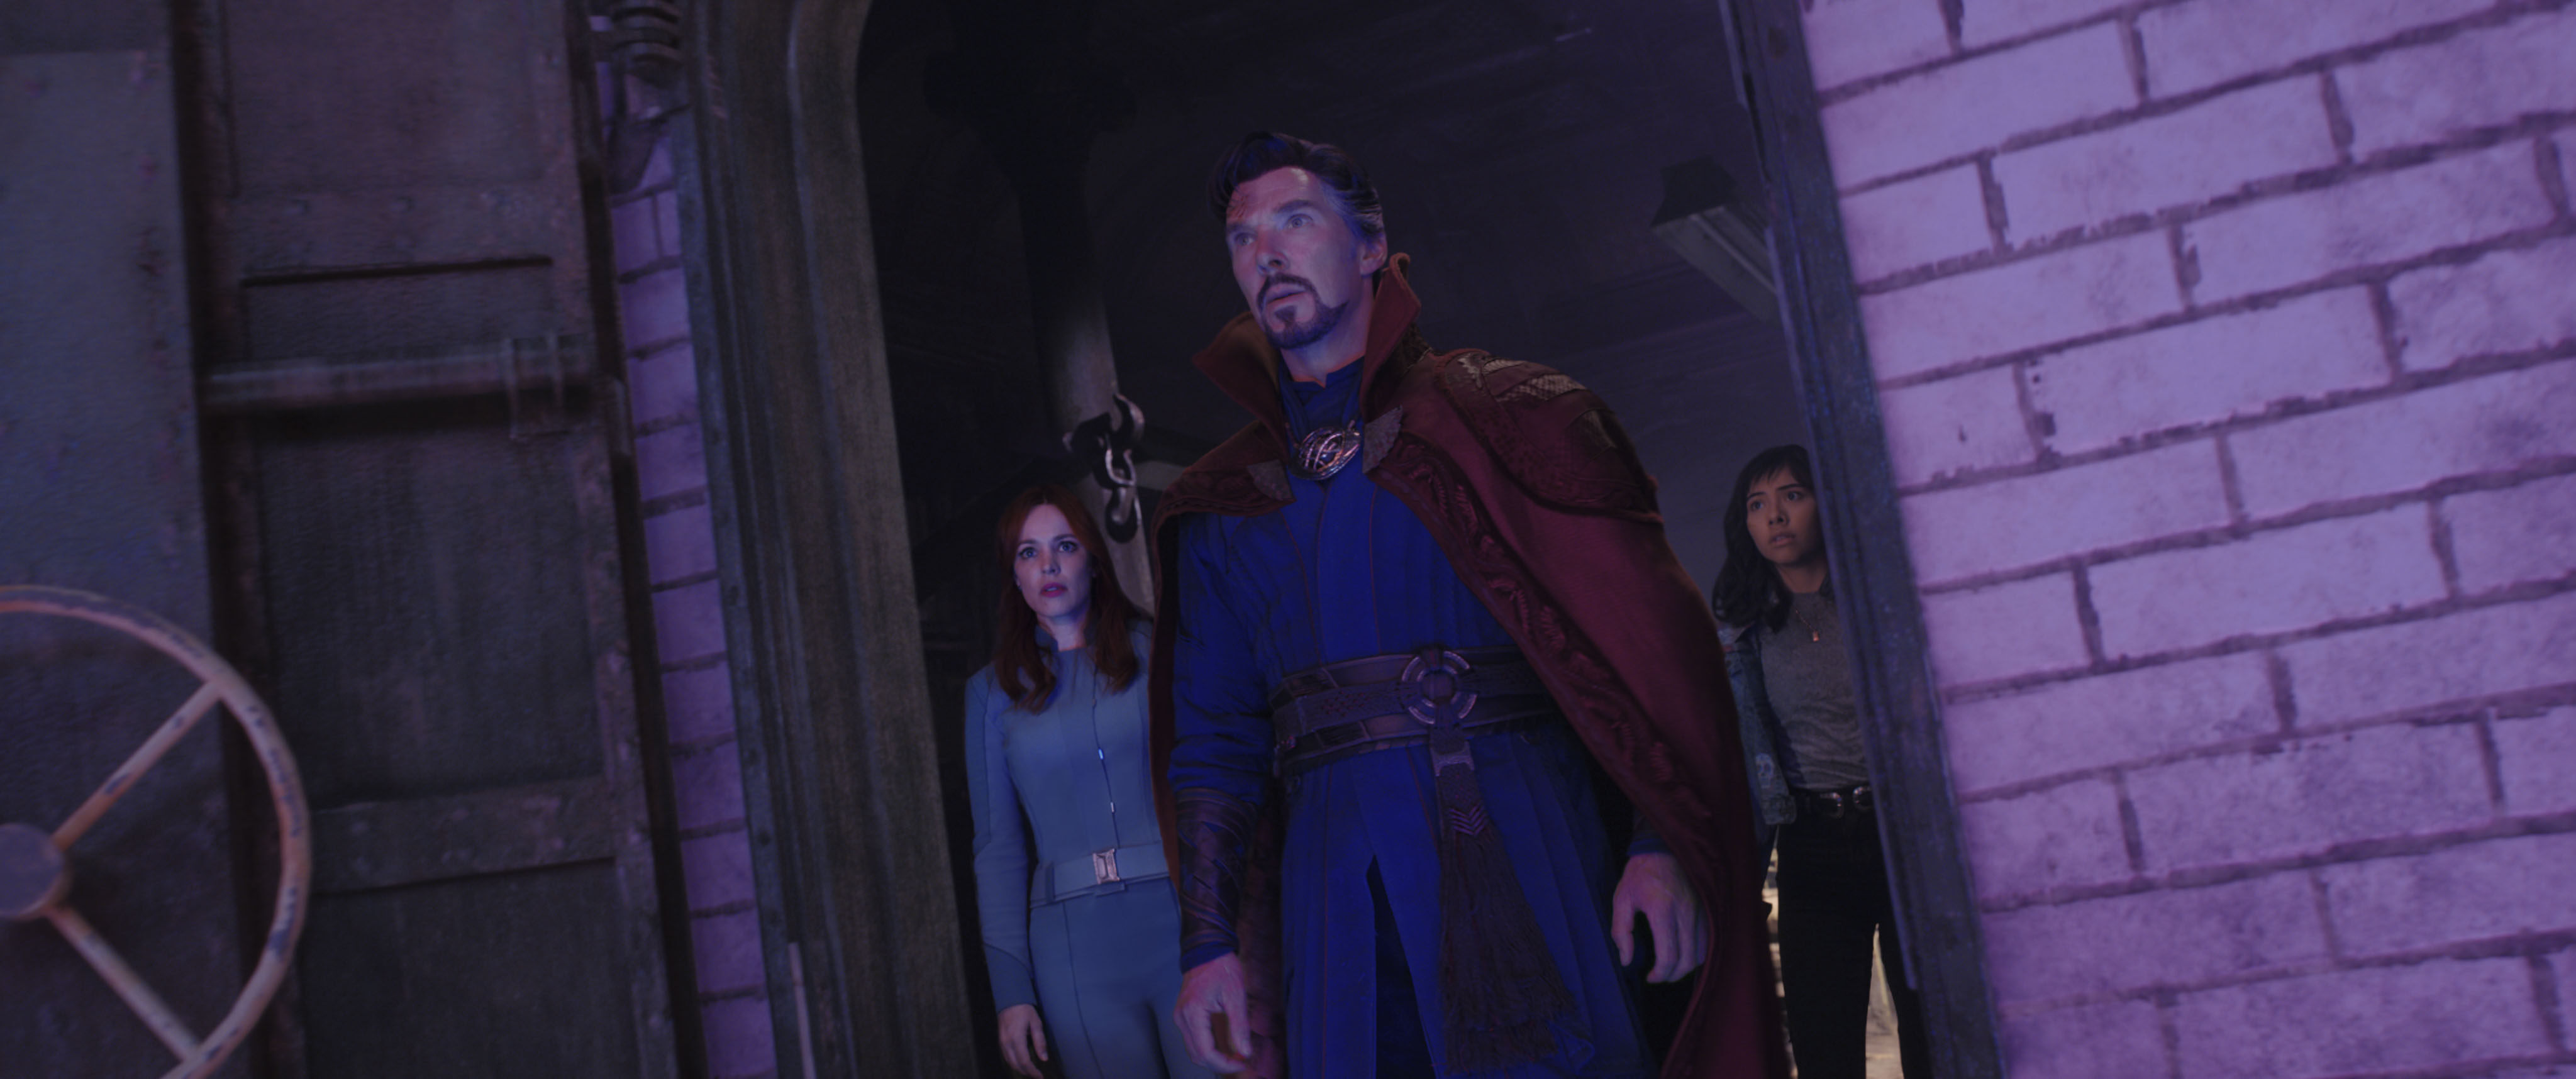 (From left) Rachel McAdams, Benedict Cumberbatch and Xochitl Gomez in a still from Doctor Strange in the Multiverse of Madness (category IIA), directed by Sam Raimi. Chiwetel Ejiofor co-stars. Photo: Marvel Studios